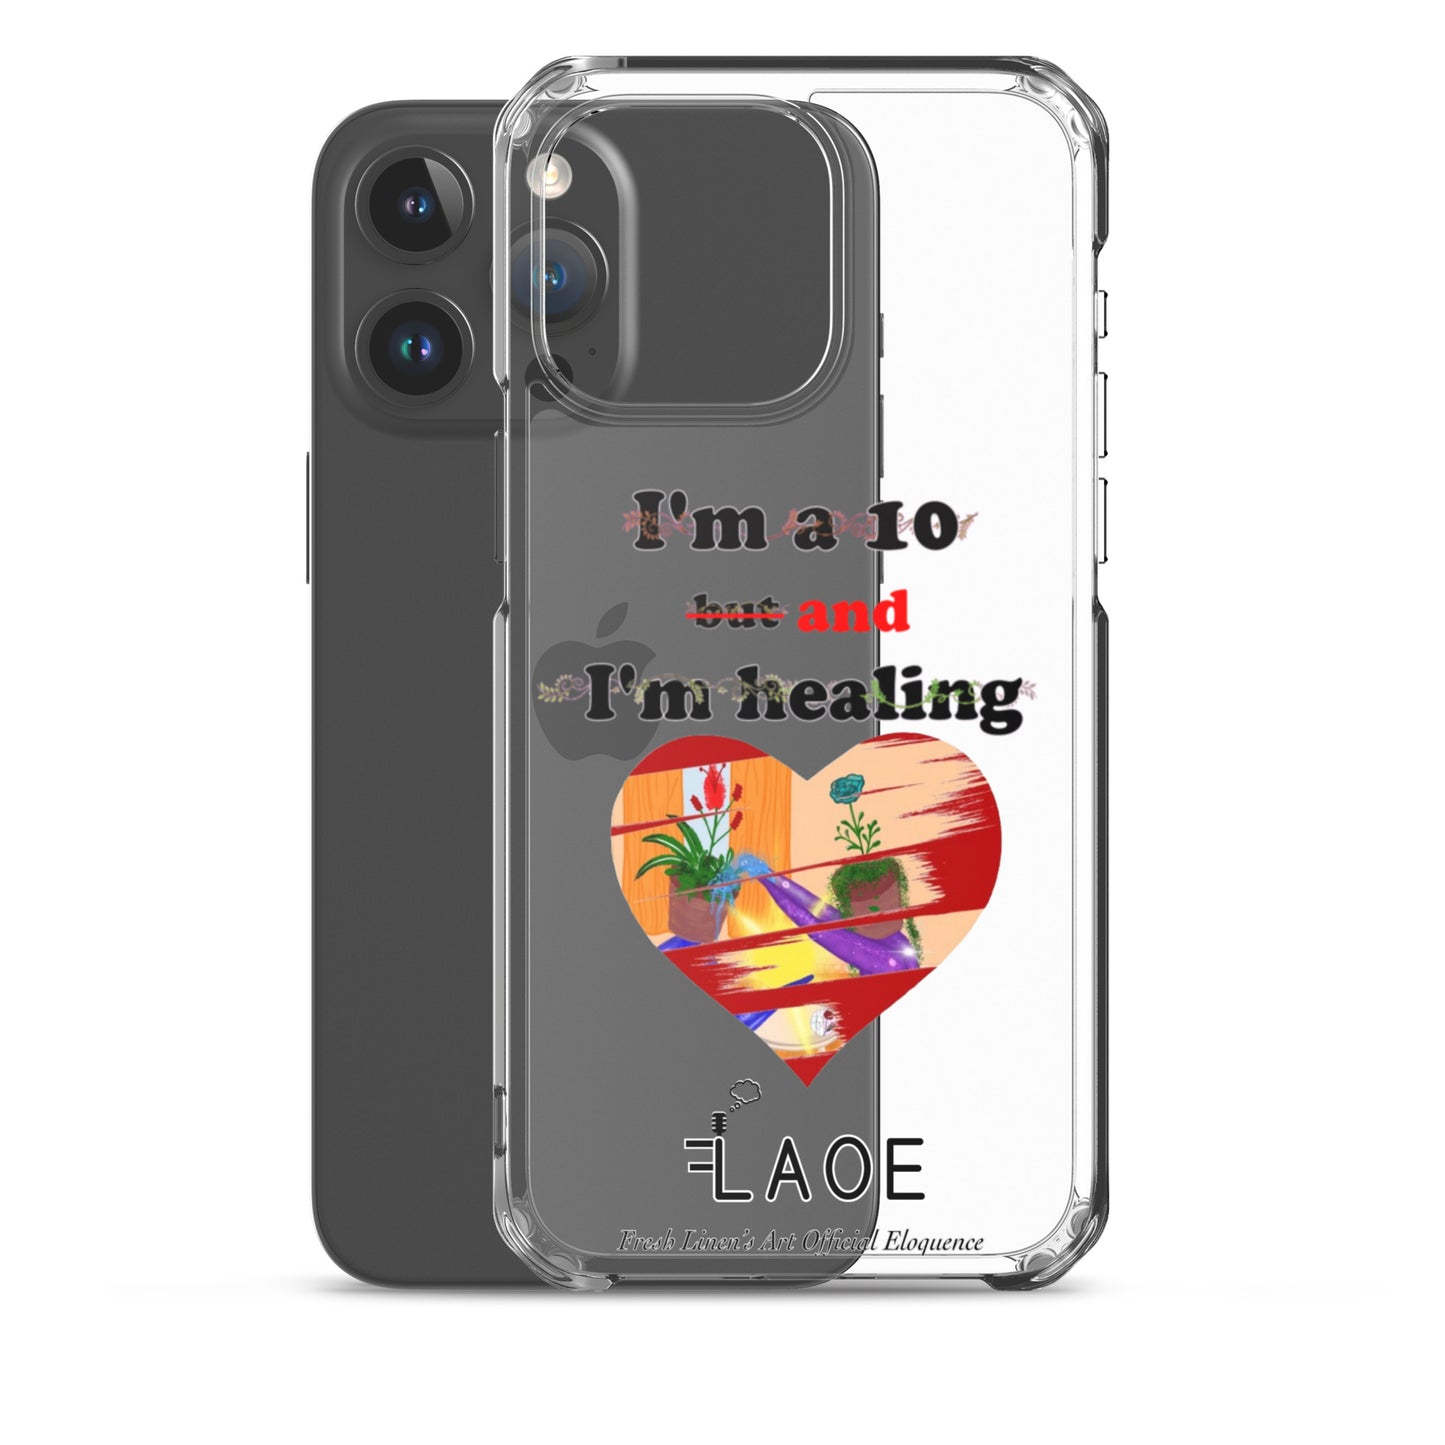 I'm a 10 and I'm Healing Clear Case for iPhone®